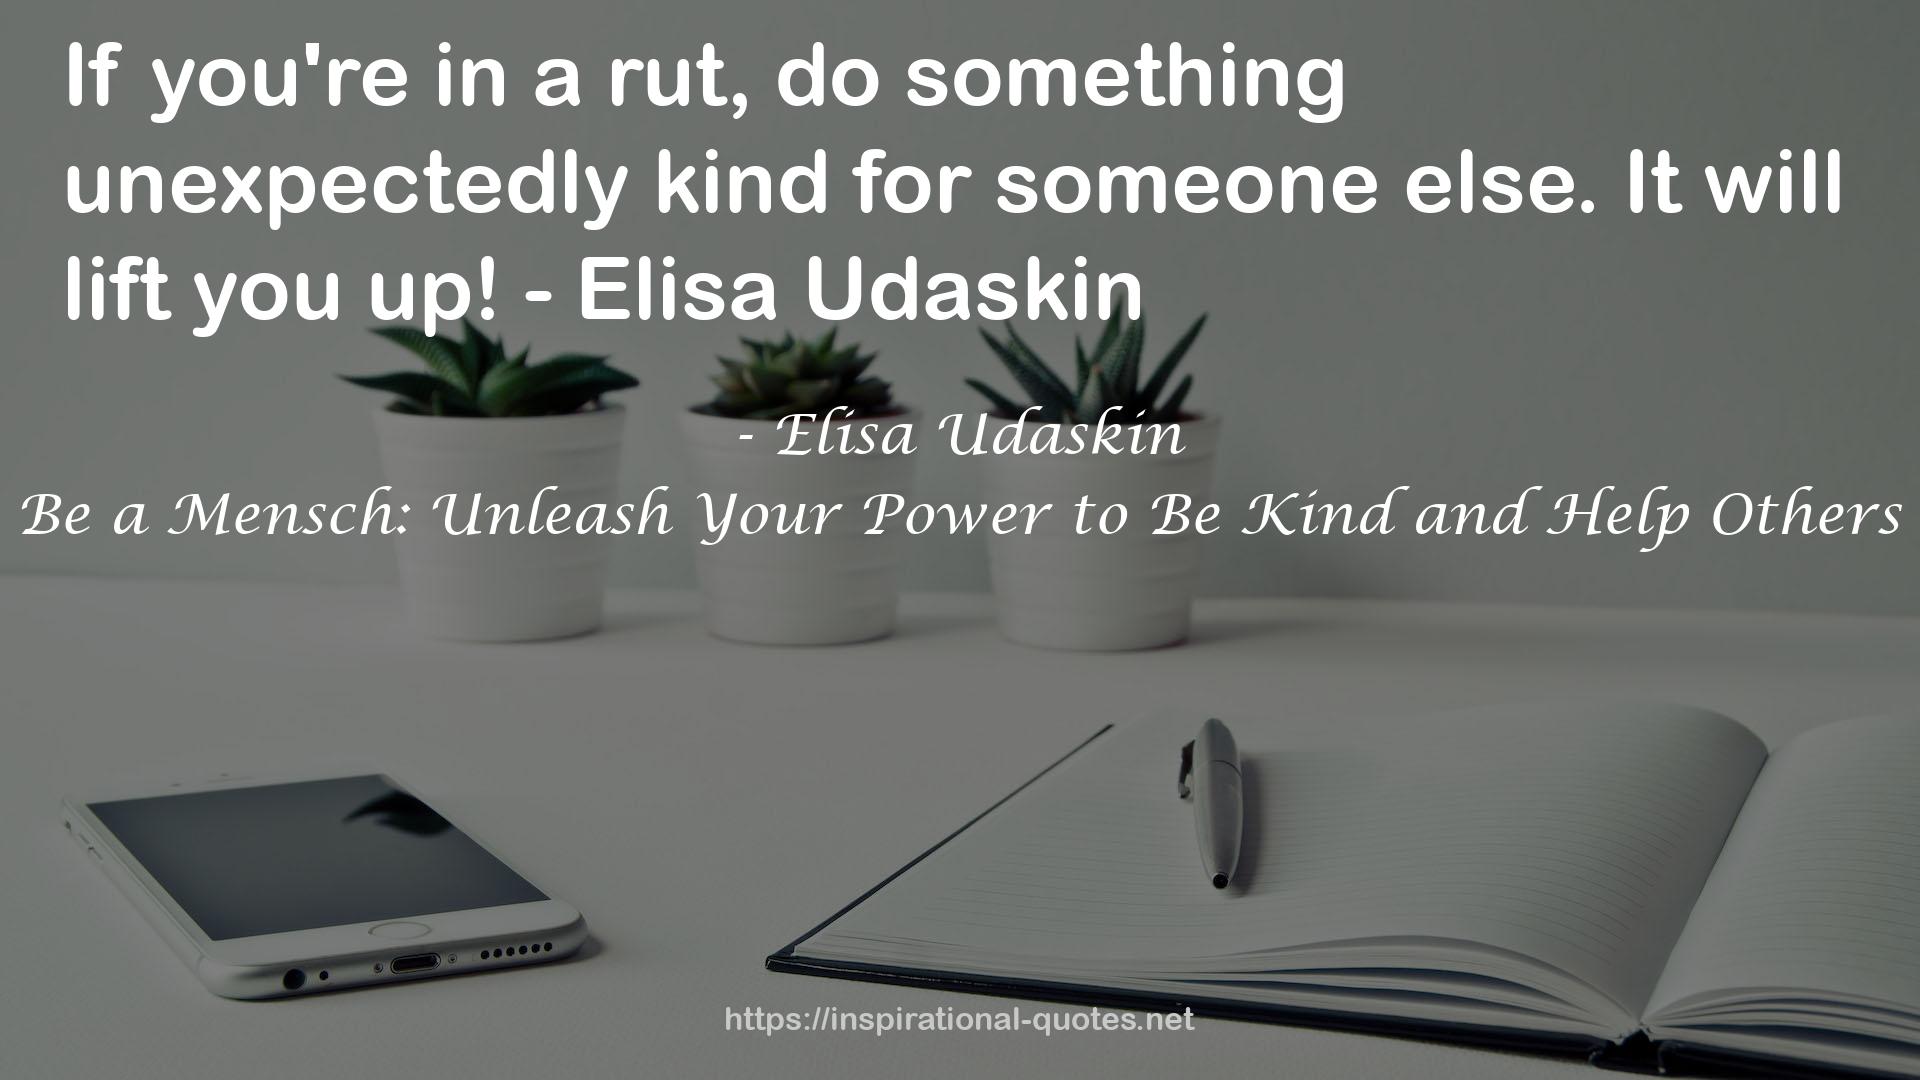 Be a Mensch: Unleash Your Power to Be Kind and Help Others QUOTES